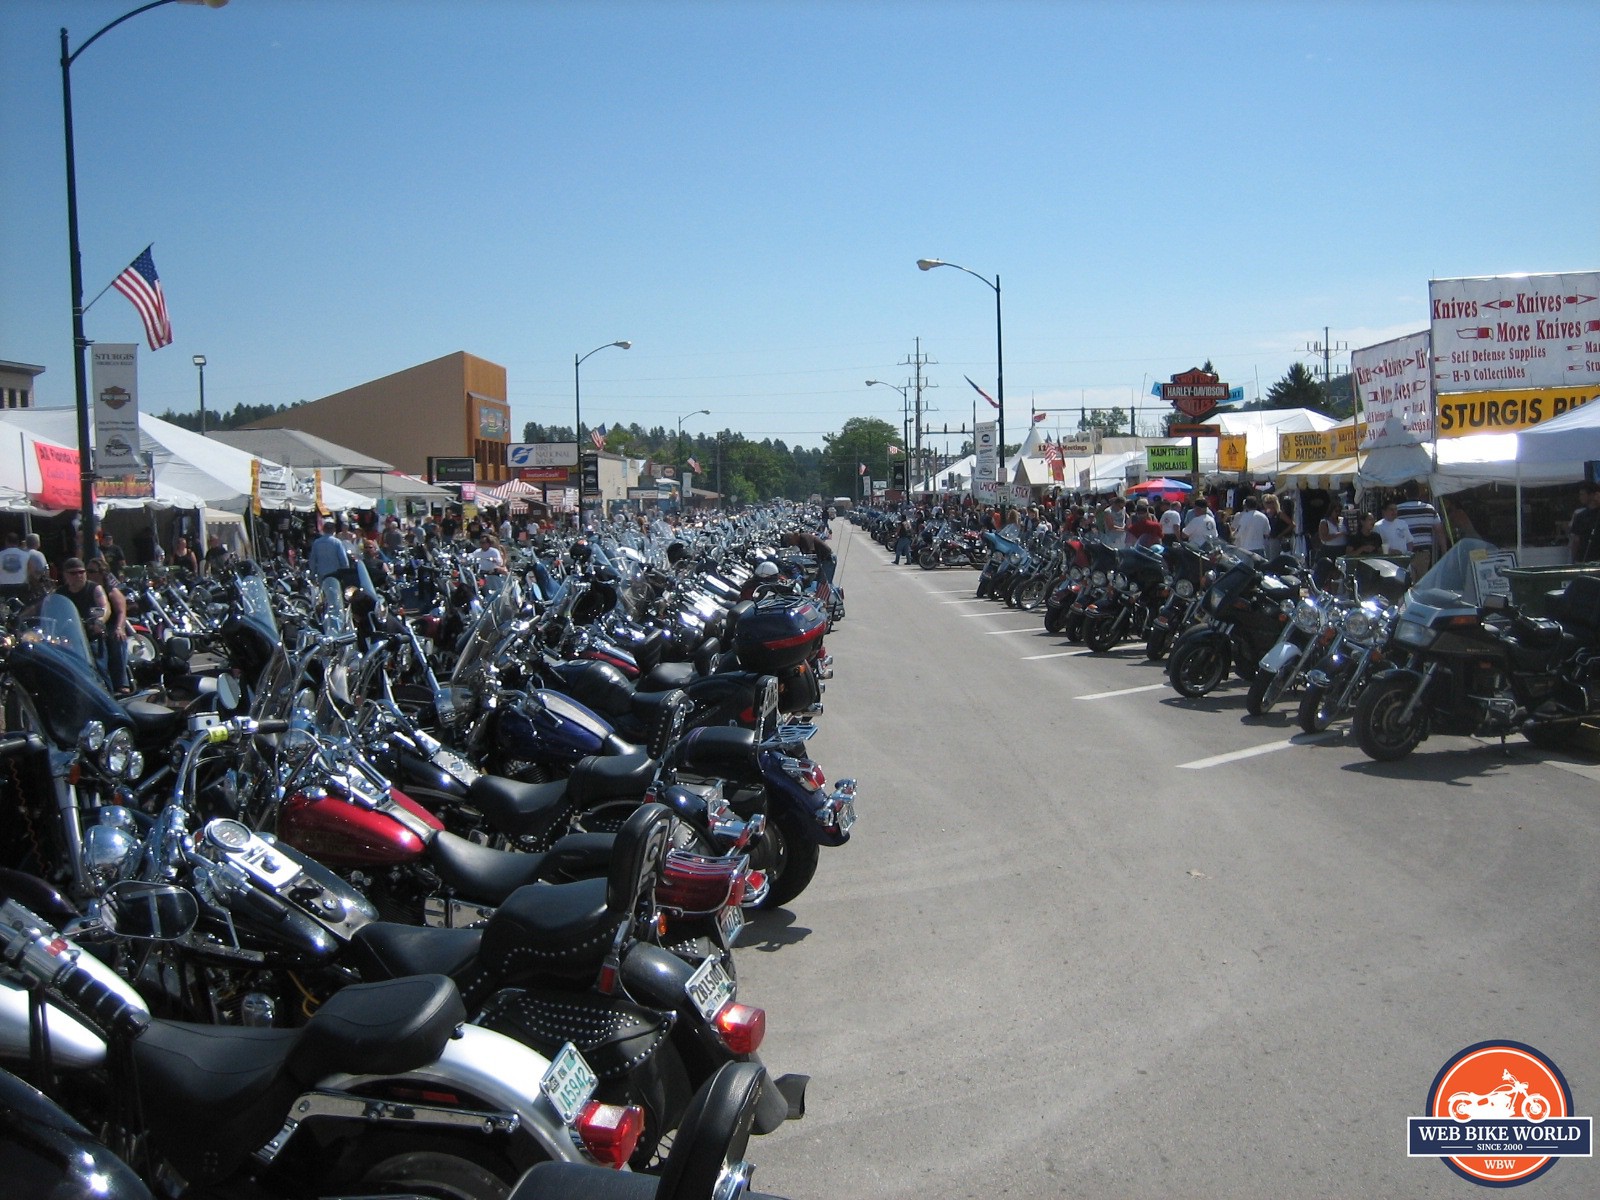 Harley-Davidson and Indian motorcycles parked near each other at Sturgis